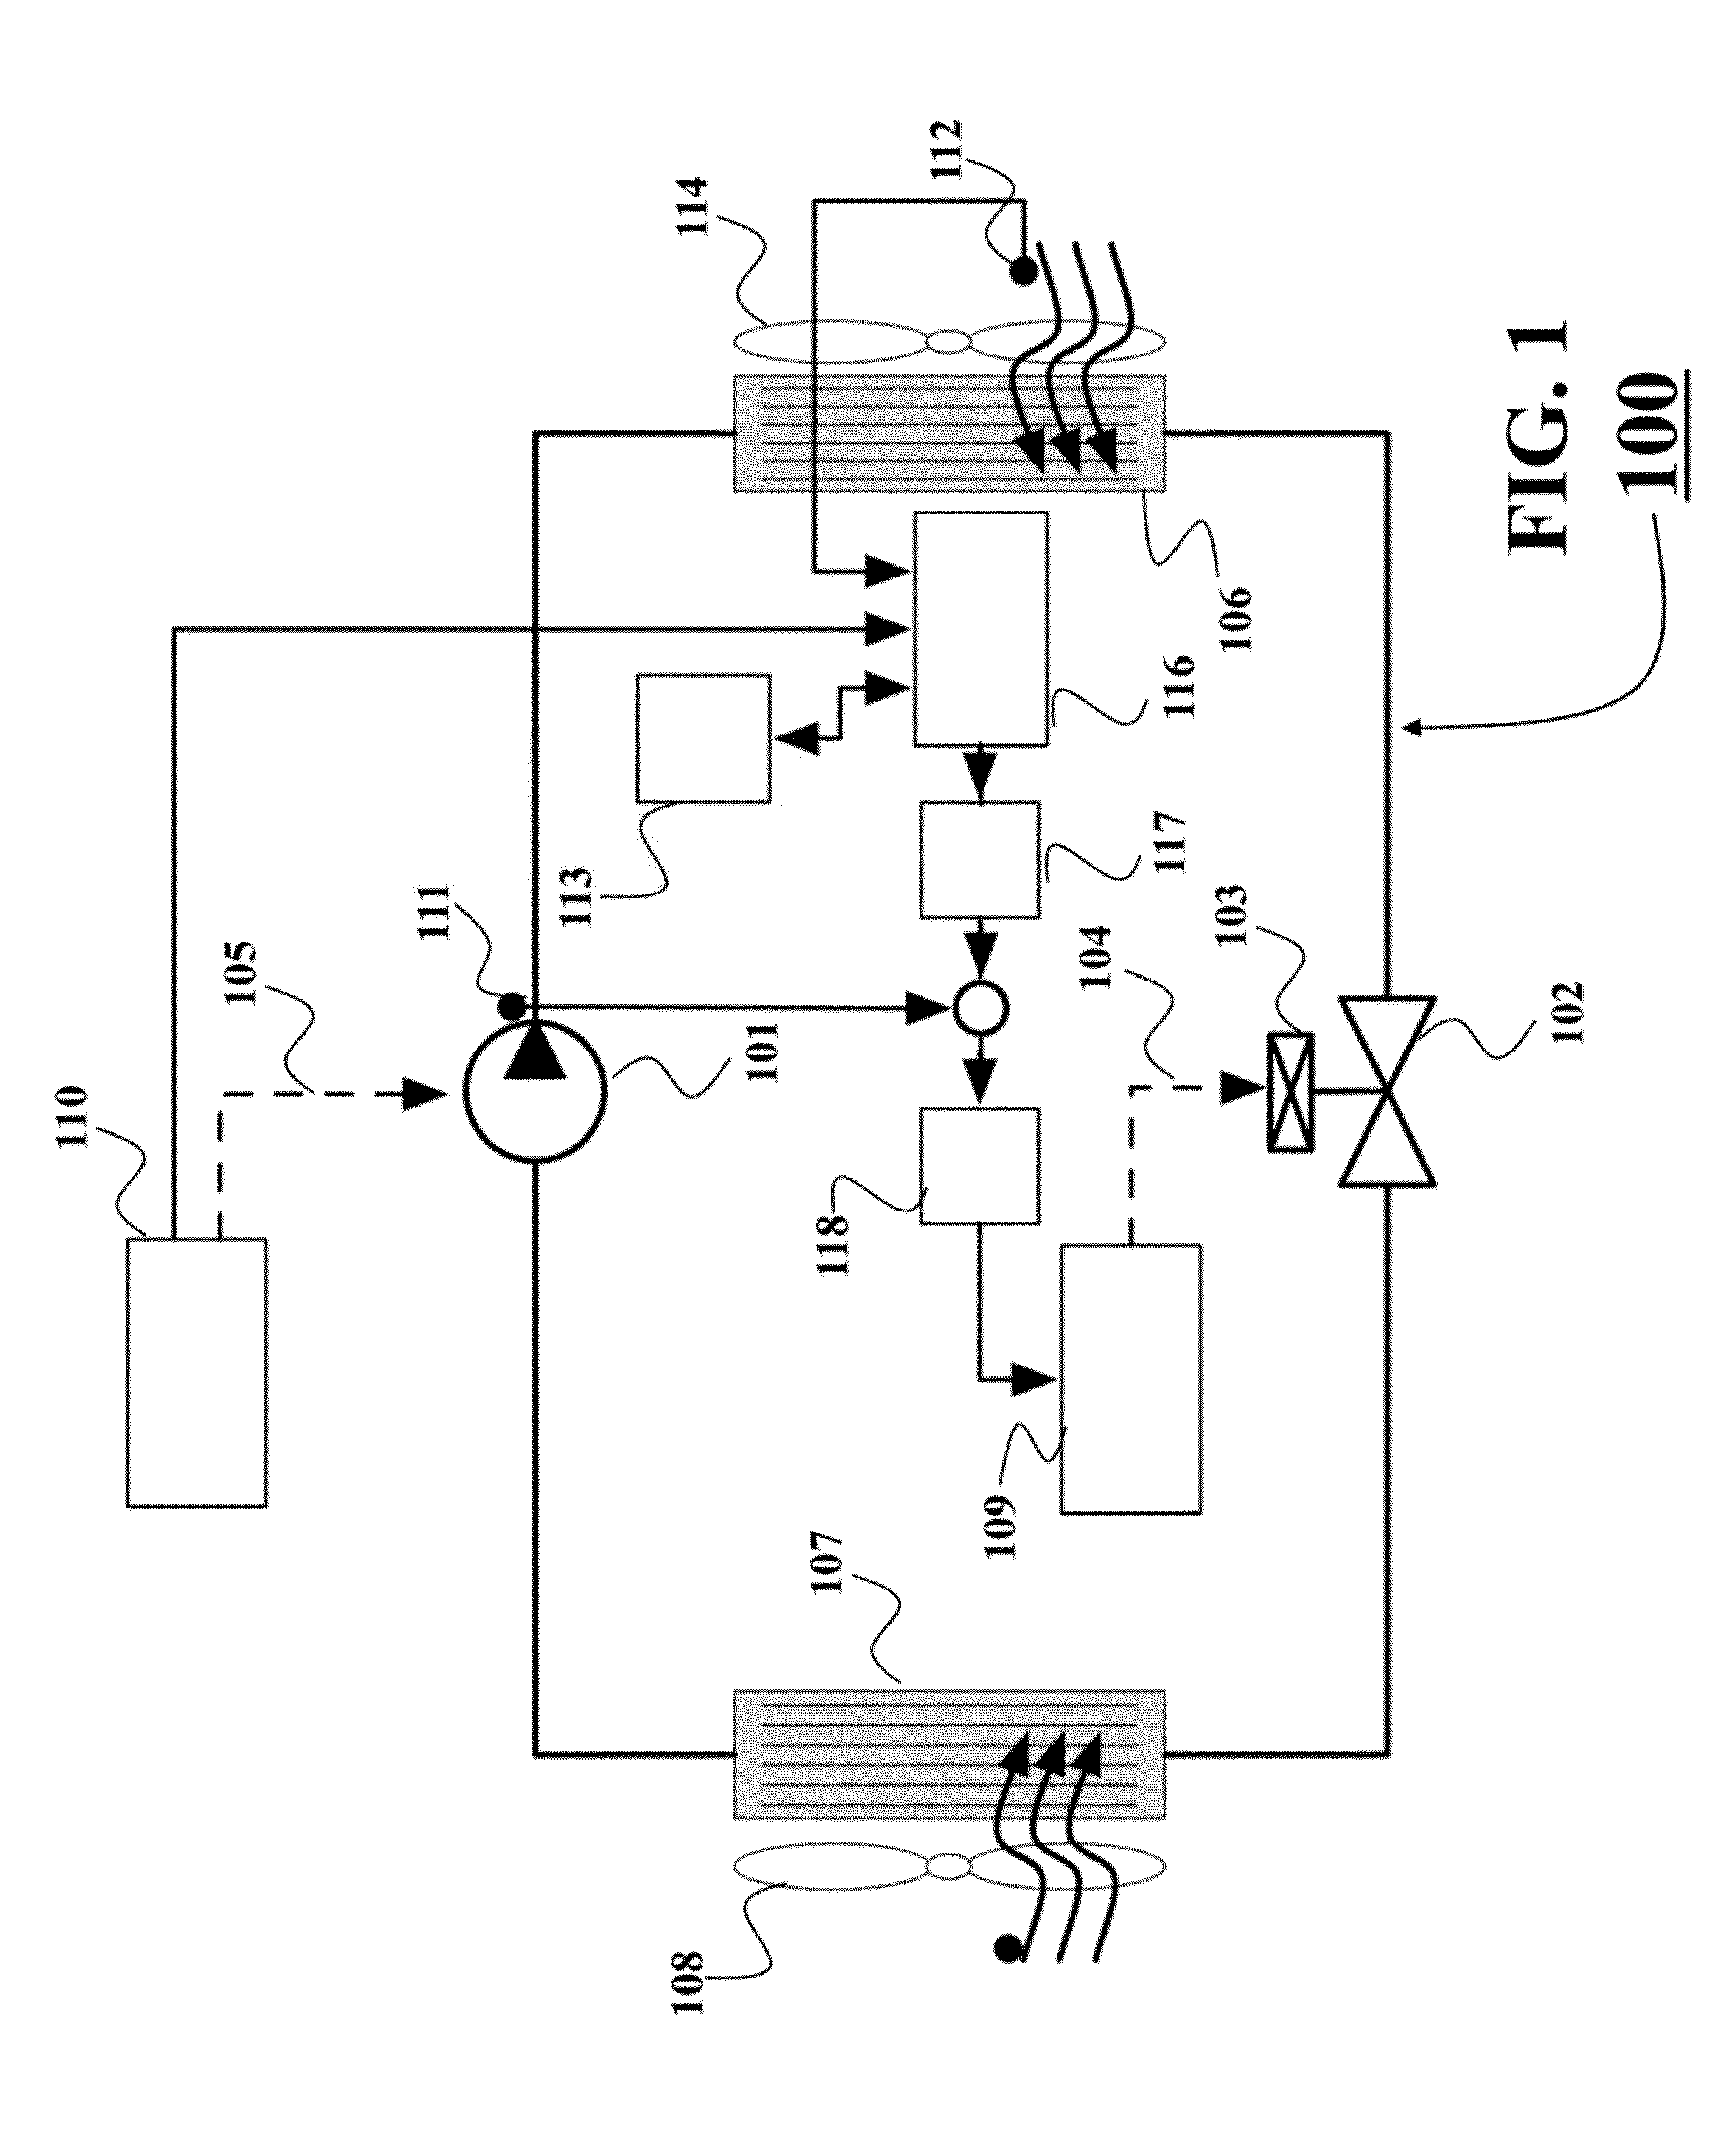 System and Method for Controlling Vapor Compression Systems